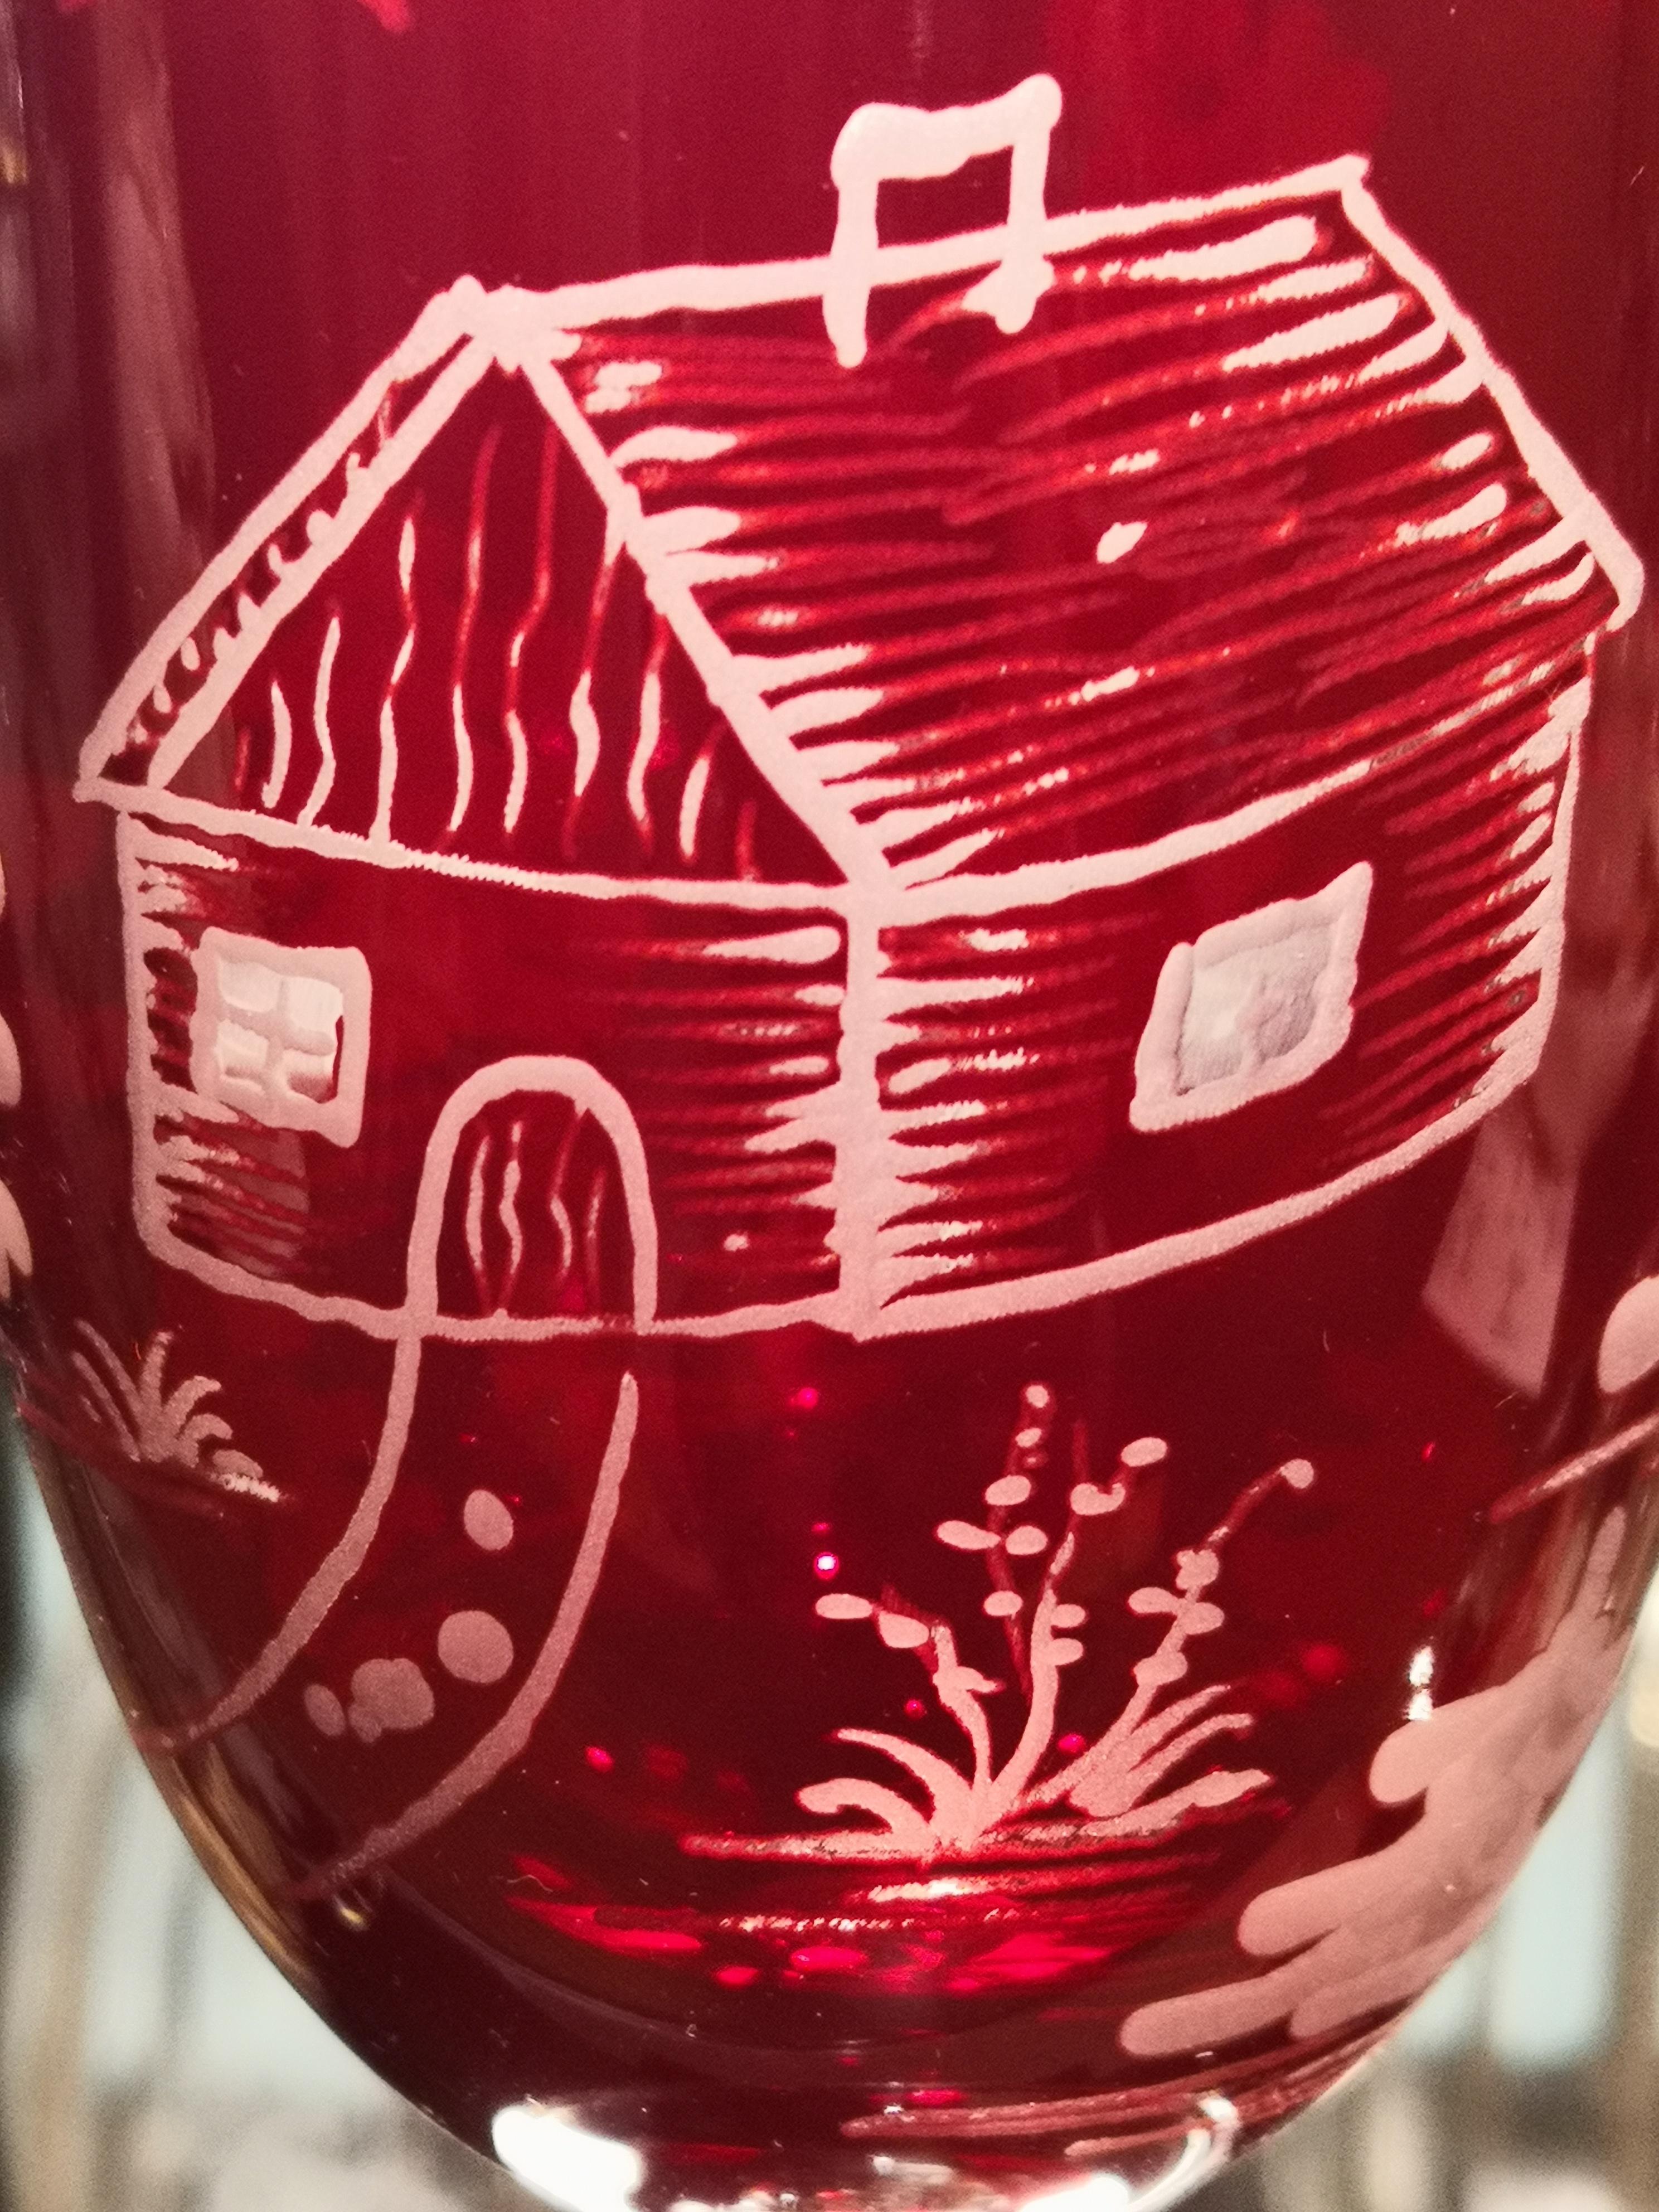 Set of six hand blown crystal glasses in red with a hand-edged skier decor all around. The decor is a country style decor, showing a skier boy, trees and mountains and a chalet all-over the glass. A matching crystal carafe can be ordered in